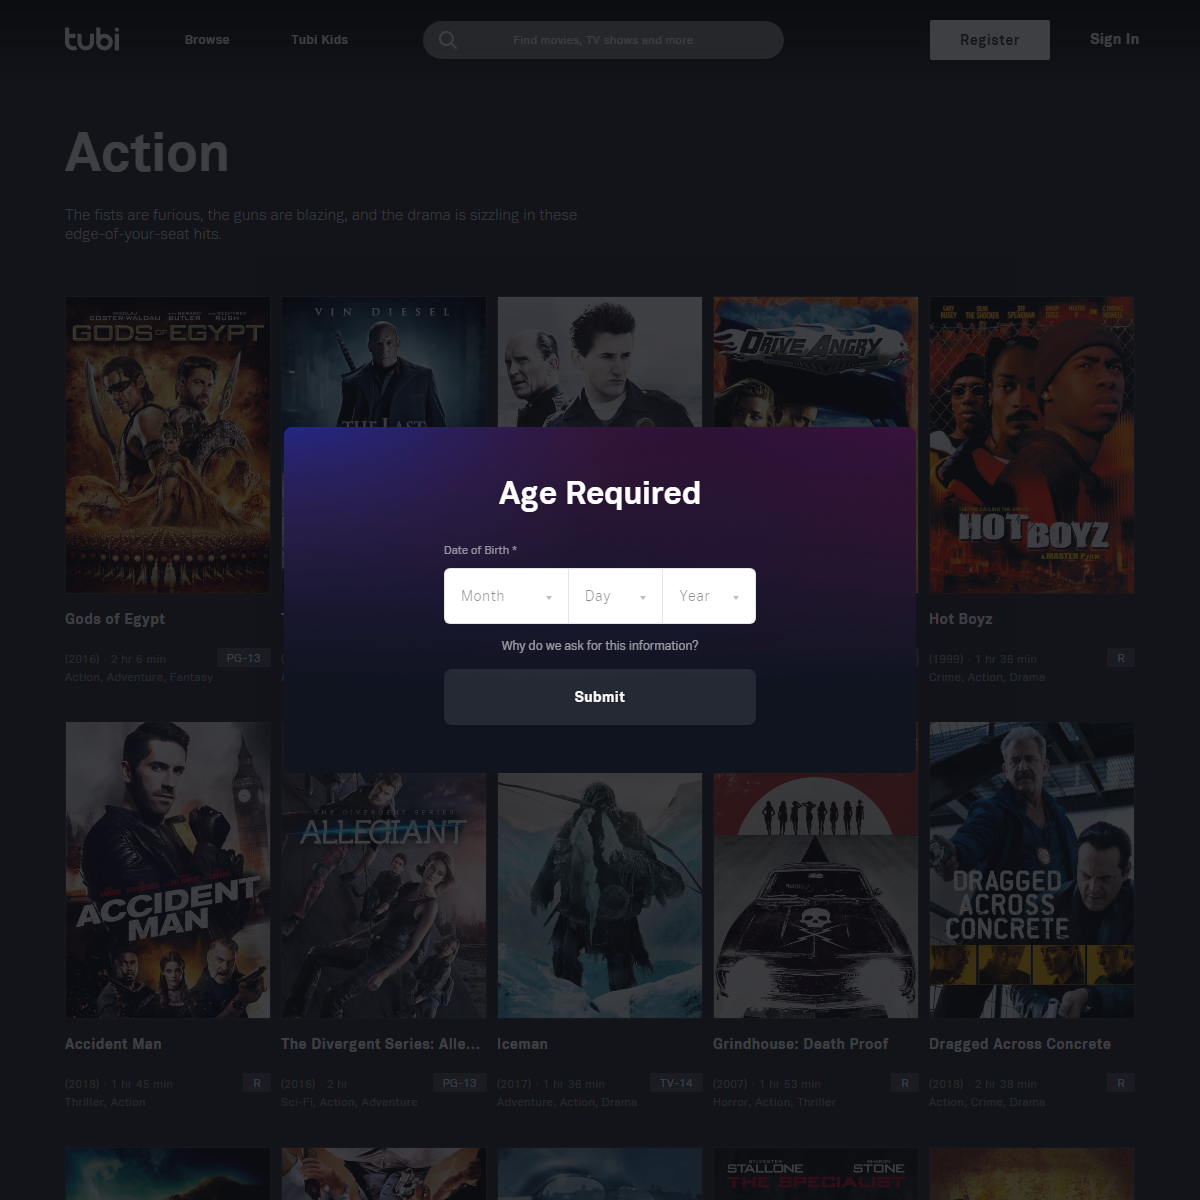 A complete backup of https://tubitv.com/category/action